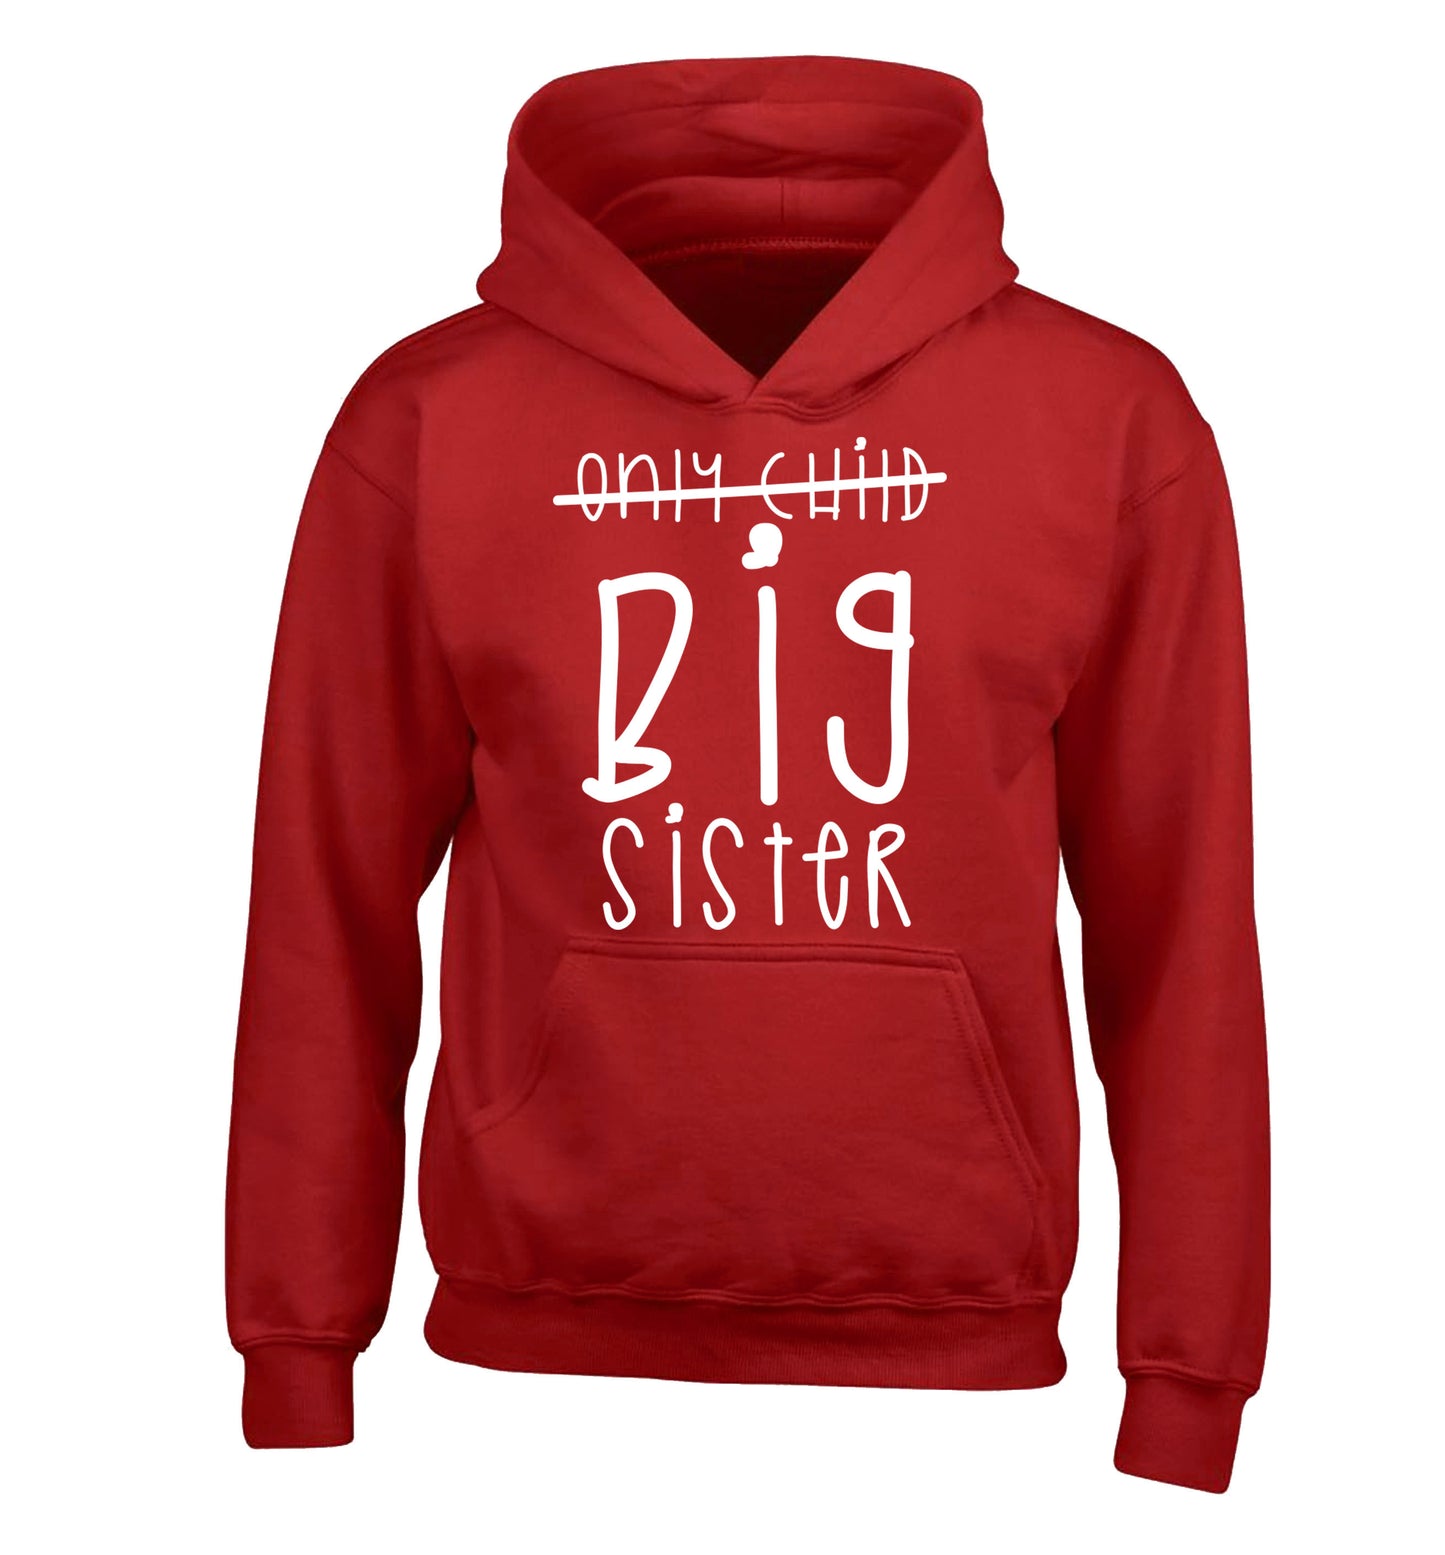 Only child big sister children's red hoodie 12-14 Years